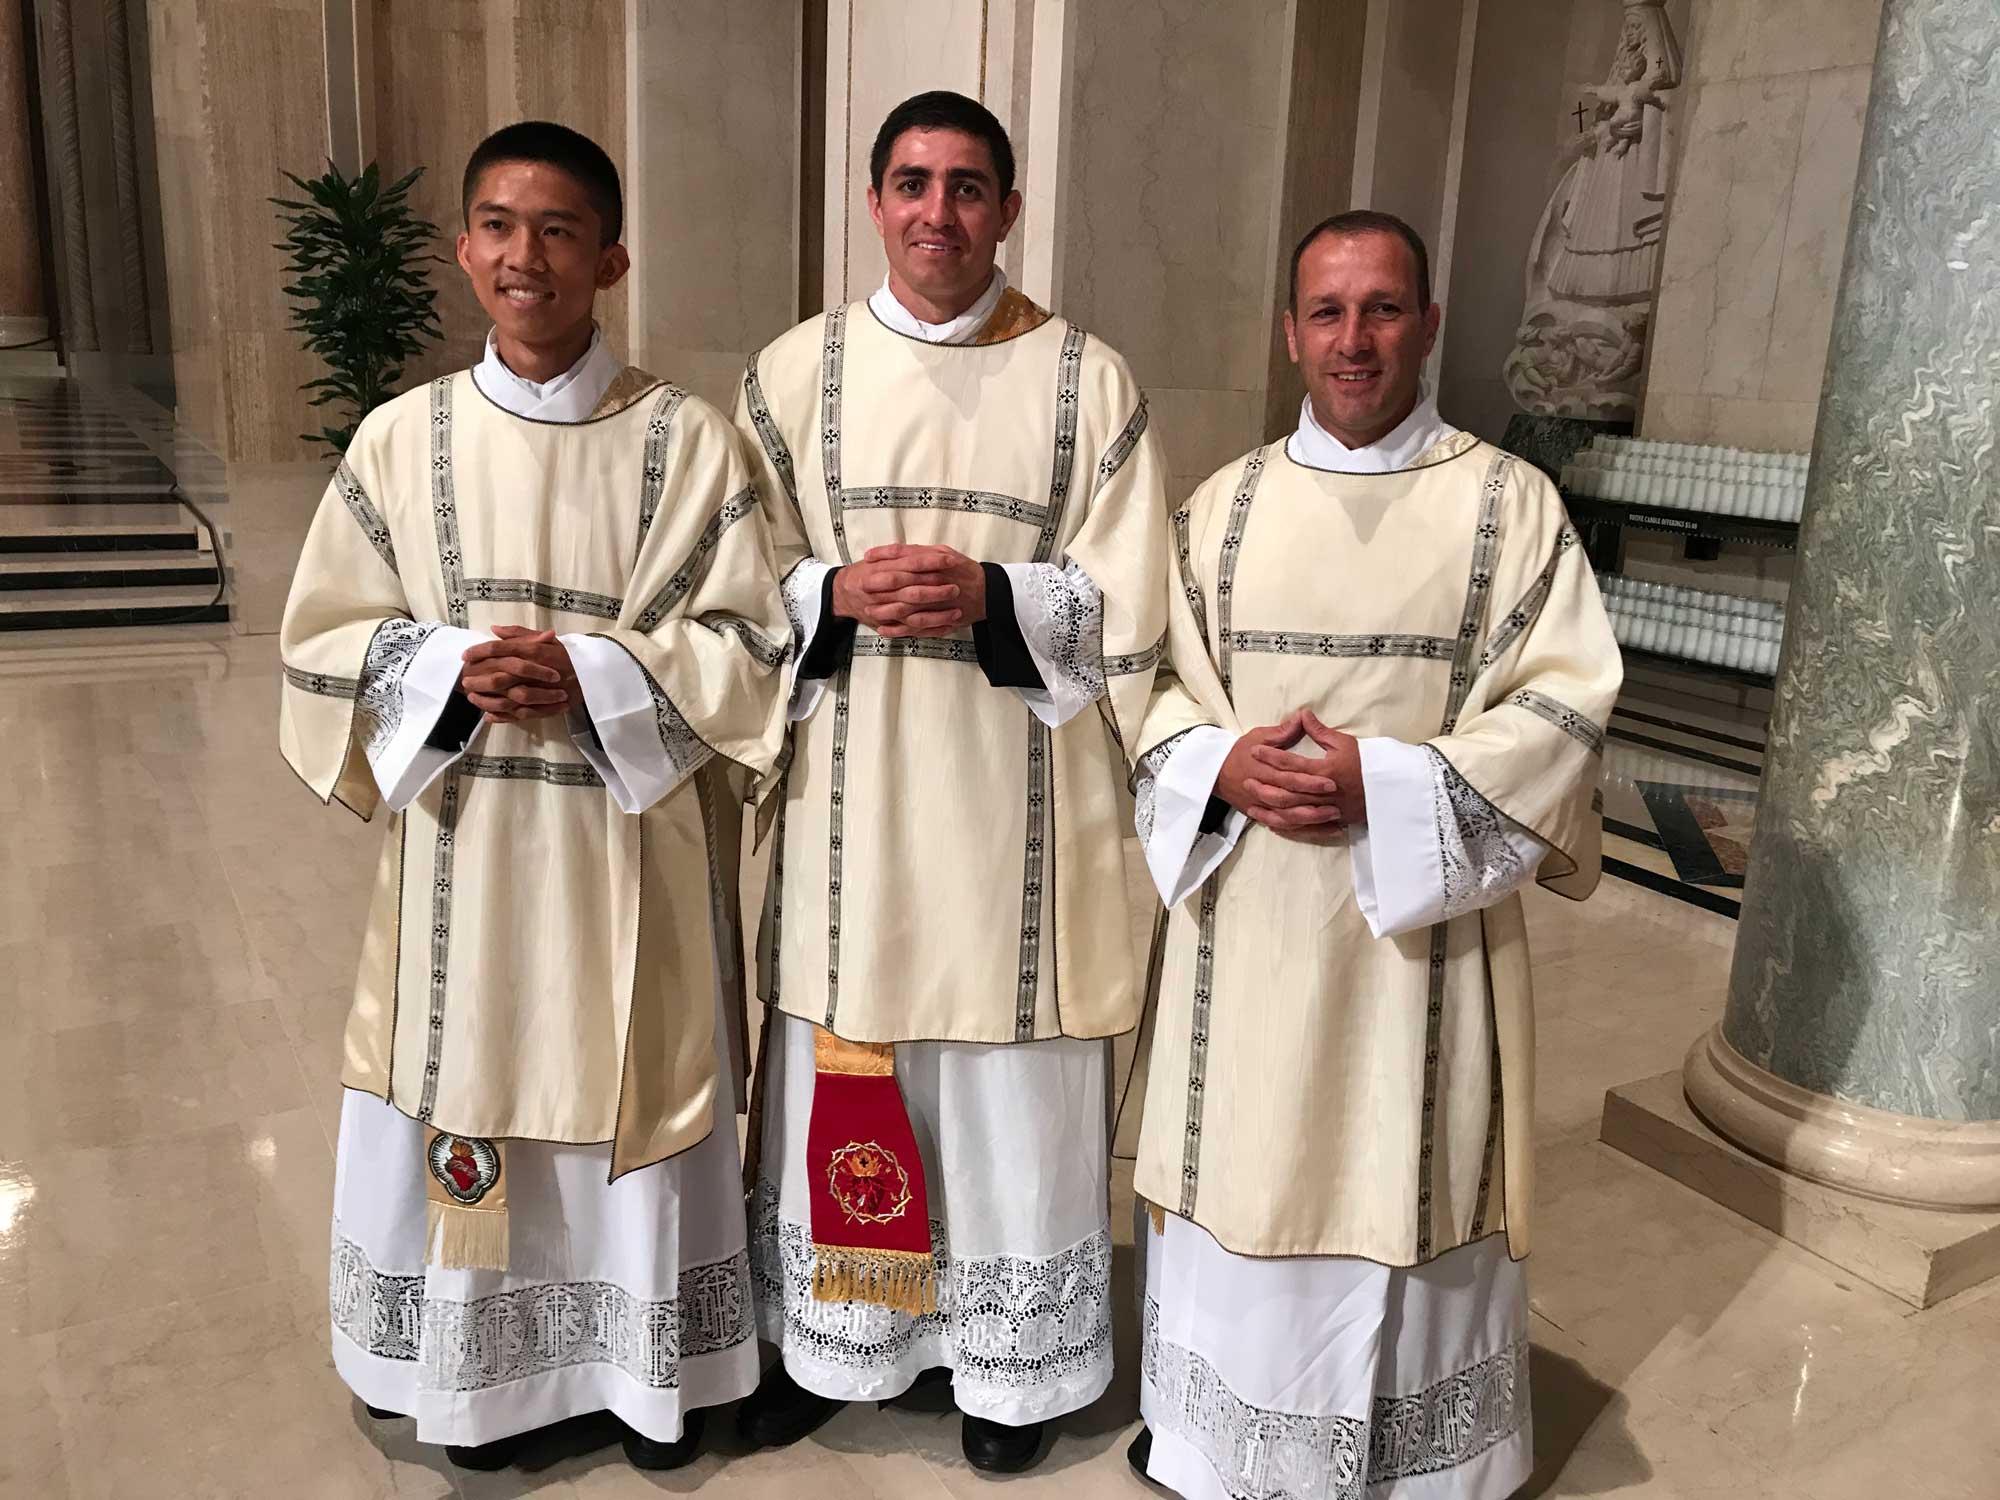 Orditantion to the Diaconate 4 3 - IVE America